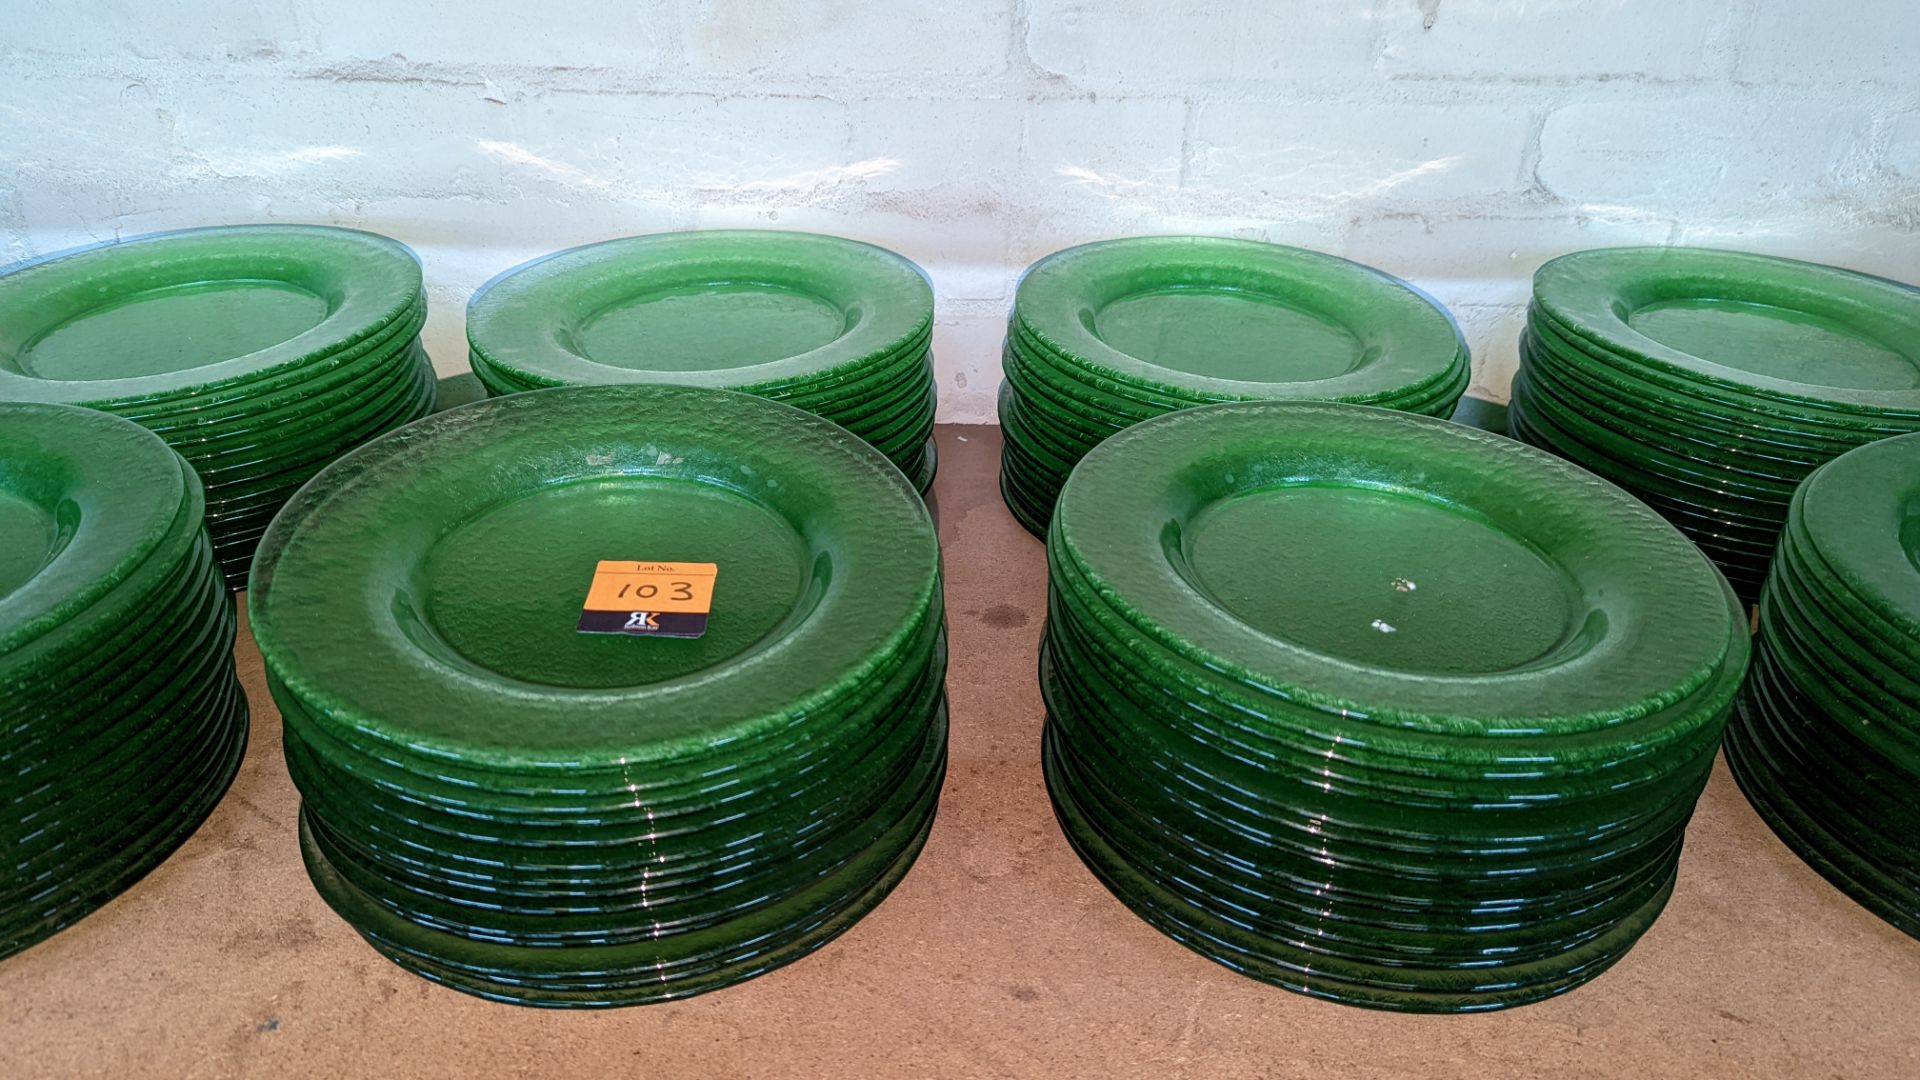 60 off green glass plates each measuring approximately 27cm diameter